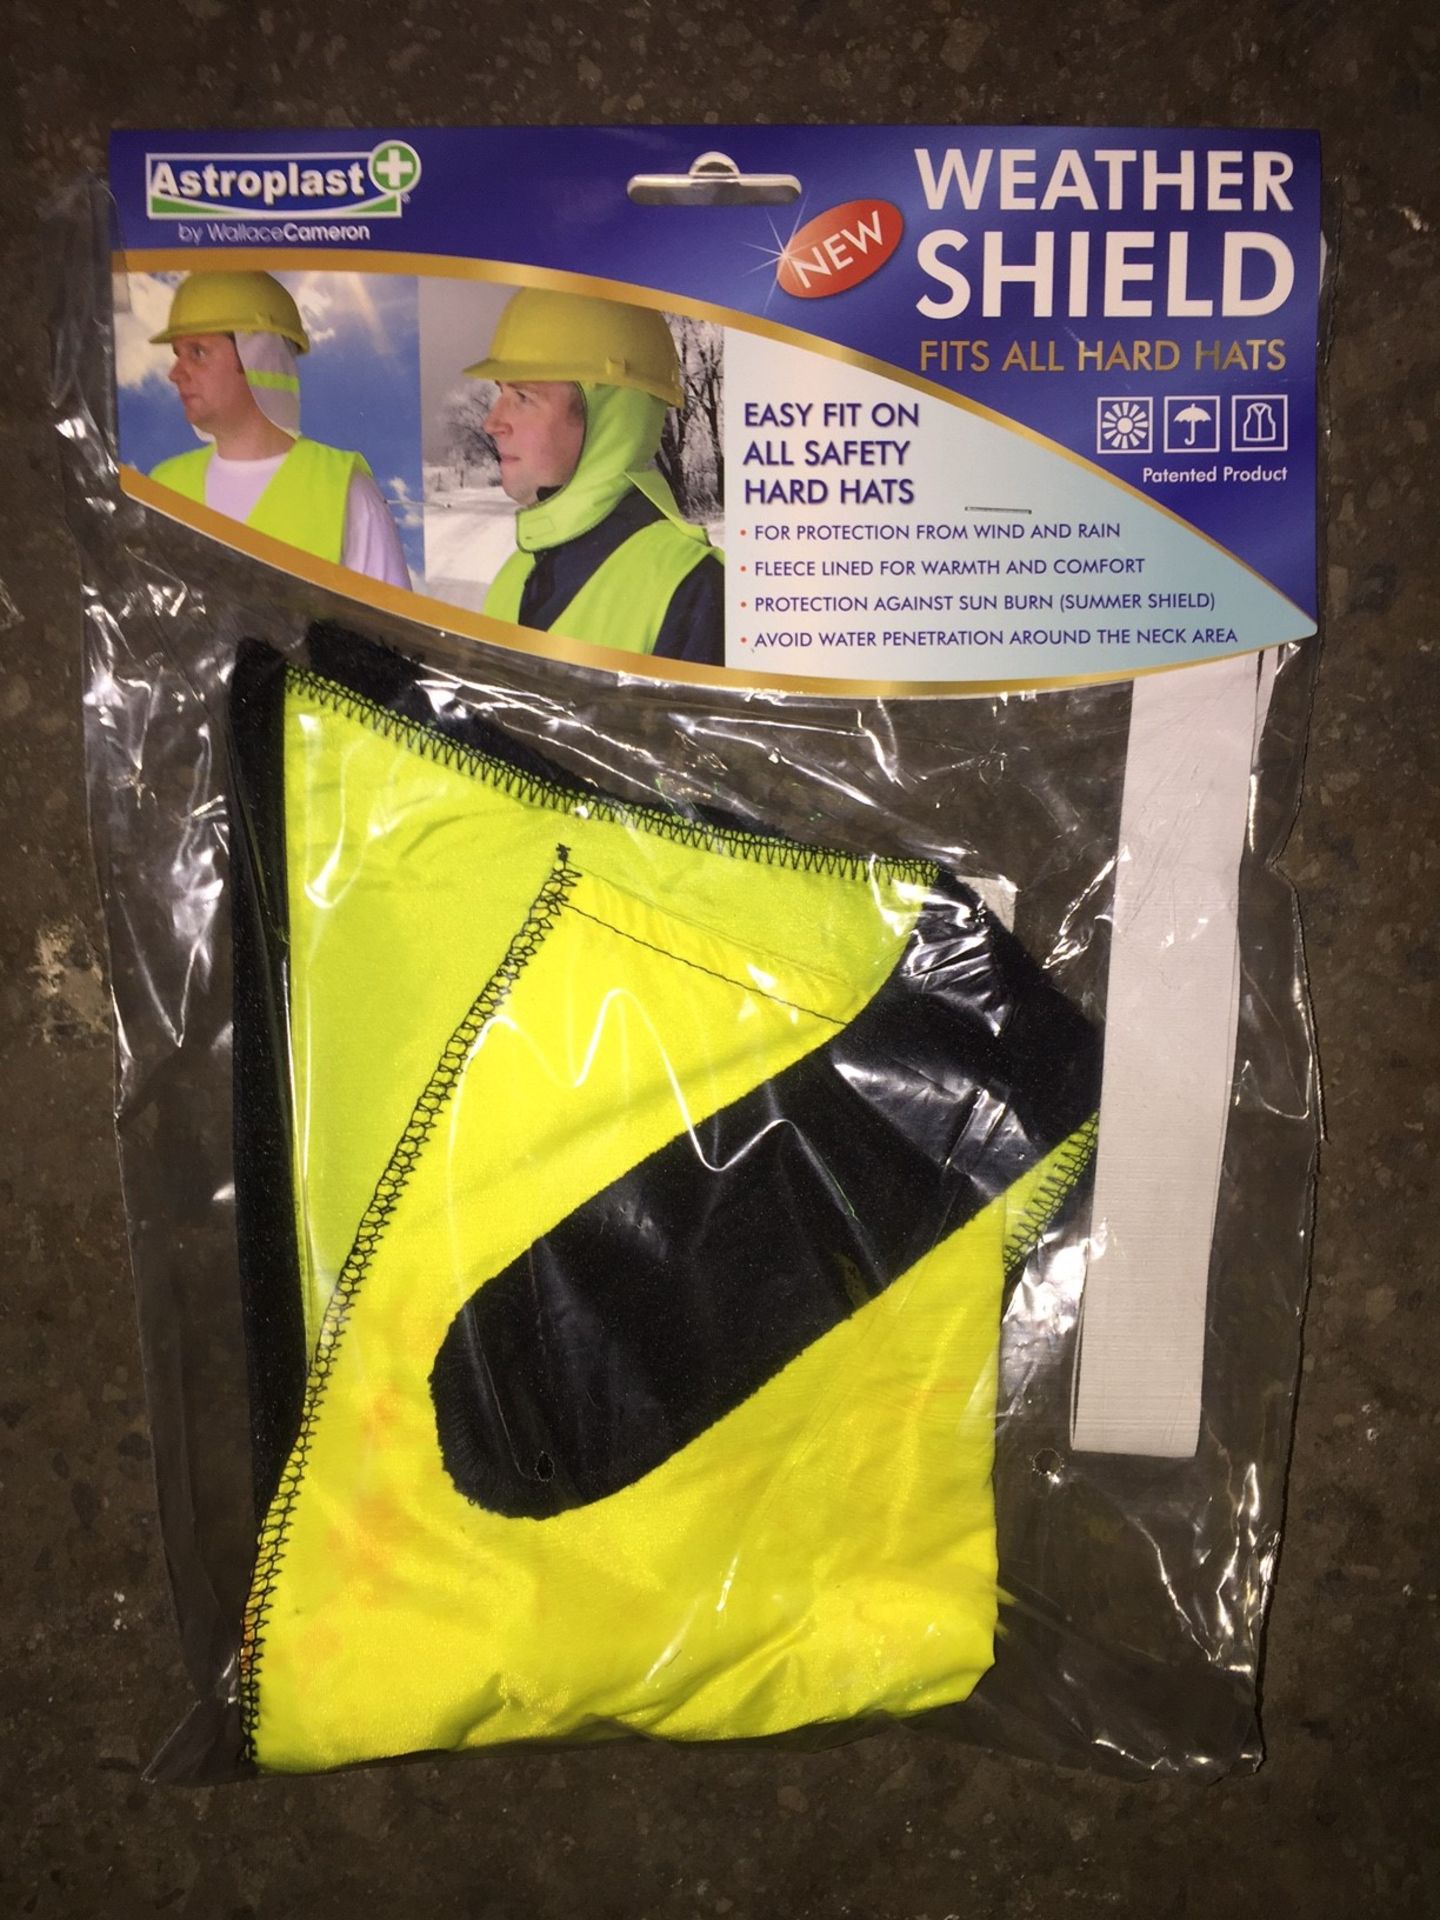 10 x Astroplast Weather Shields Yellow (Fits All Hard Hats) - RRP £5.99 Each